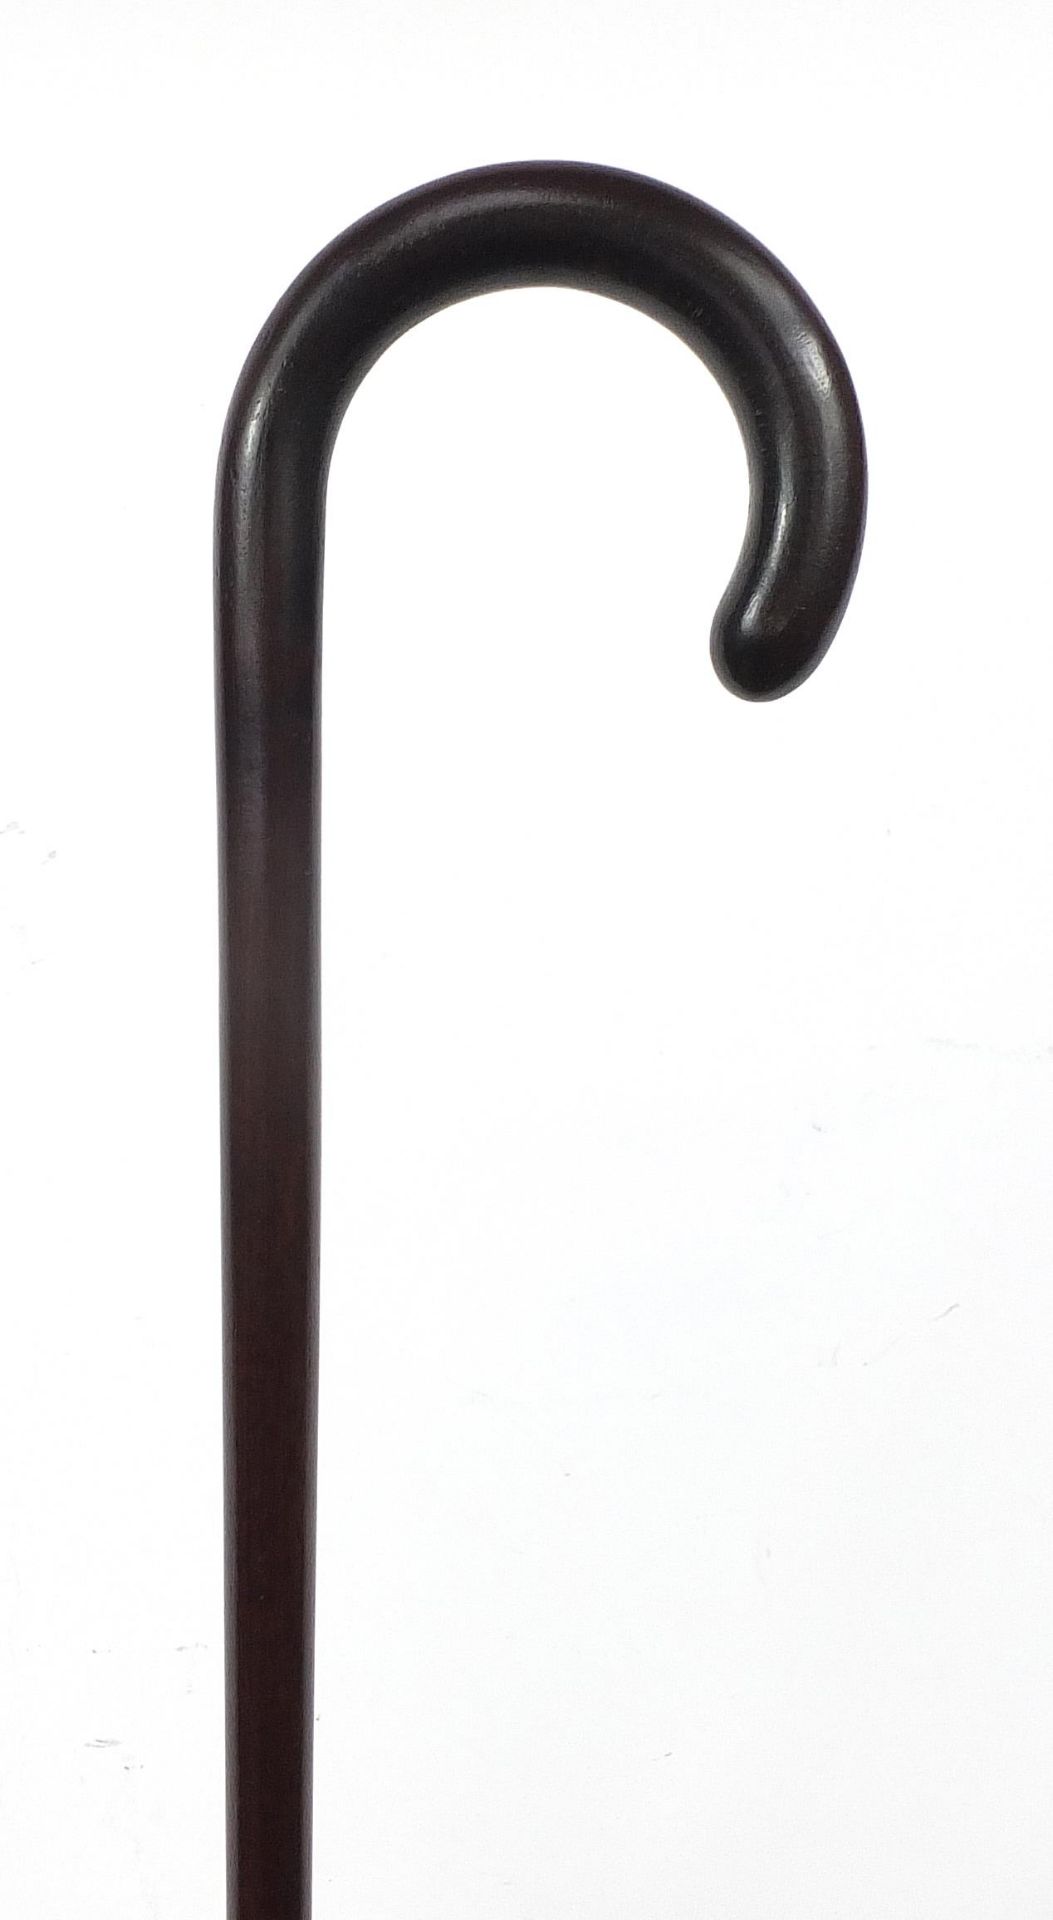 Snakewood walking cane with an ivory ferule, 82cm in length - Image 2 of 6